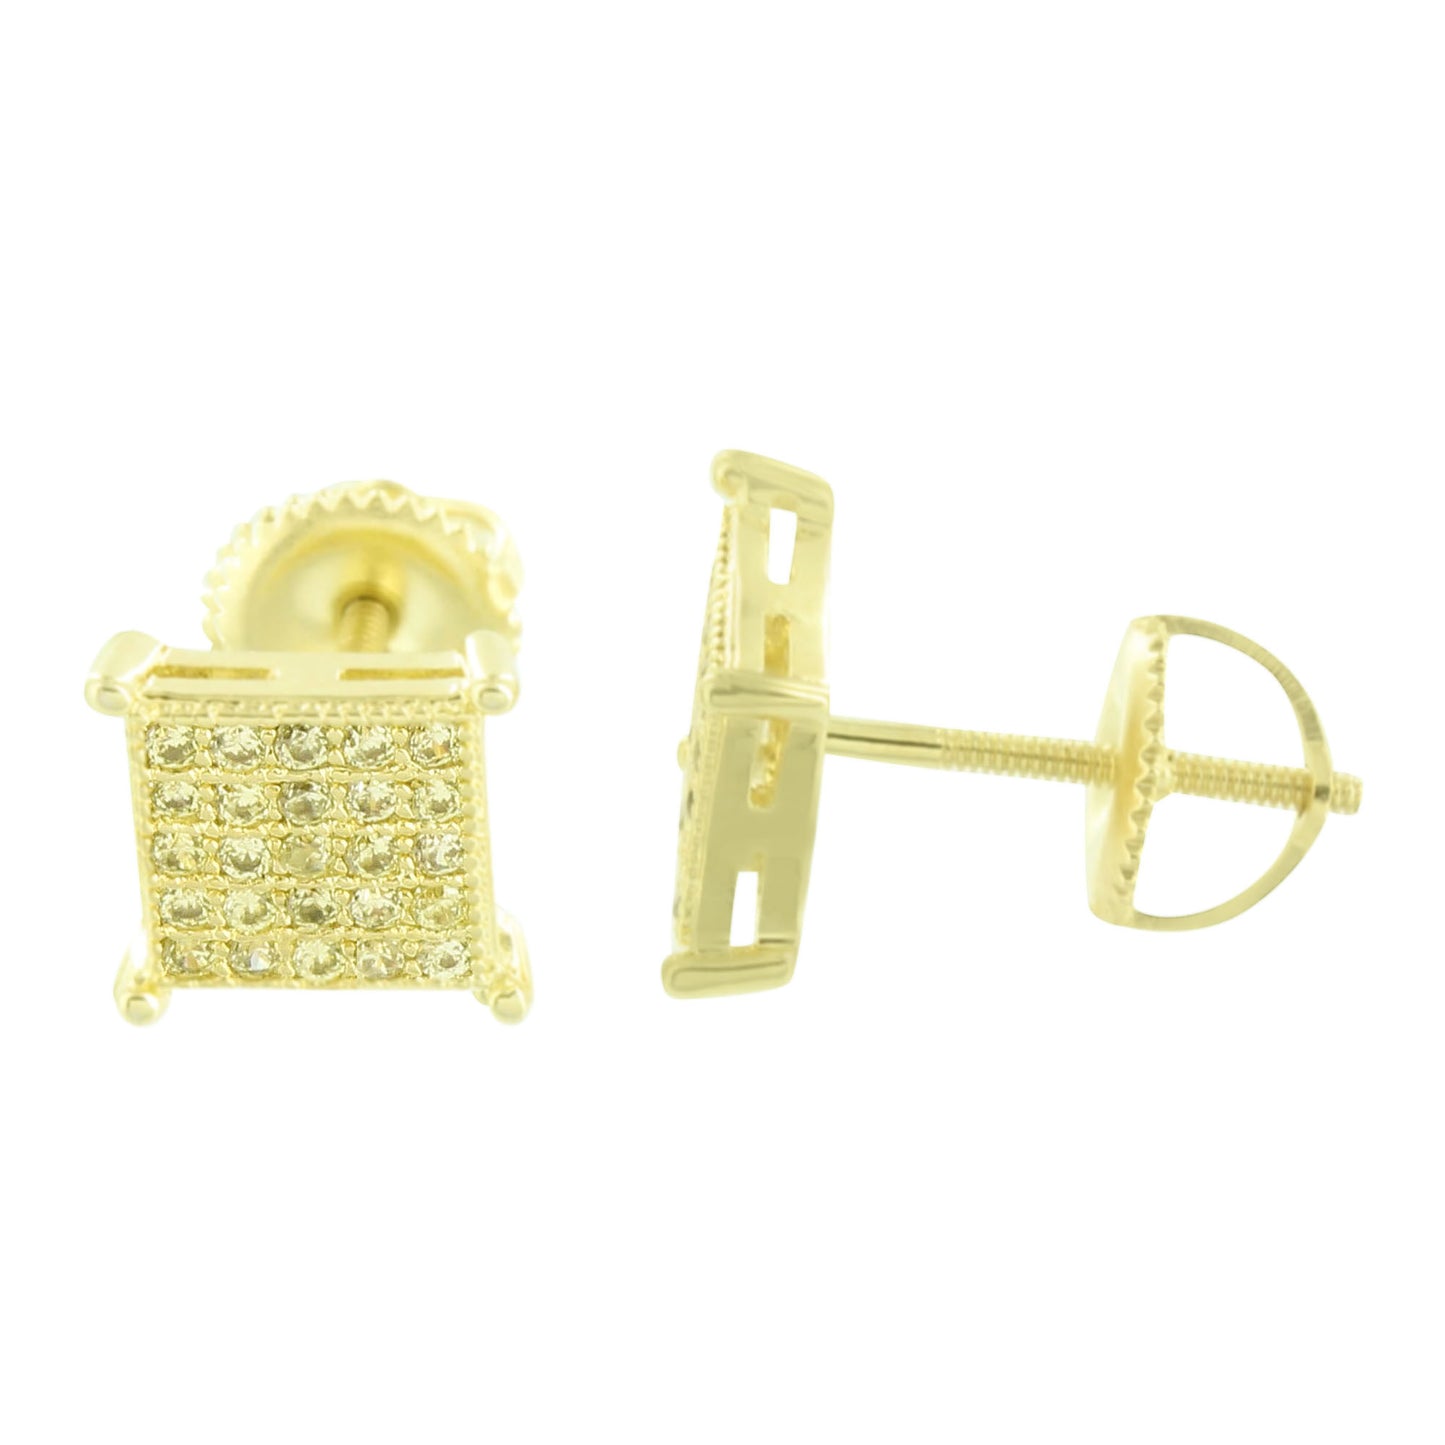 Canary Earrings Screw Back Micro Pave 7 MM Mens Womens